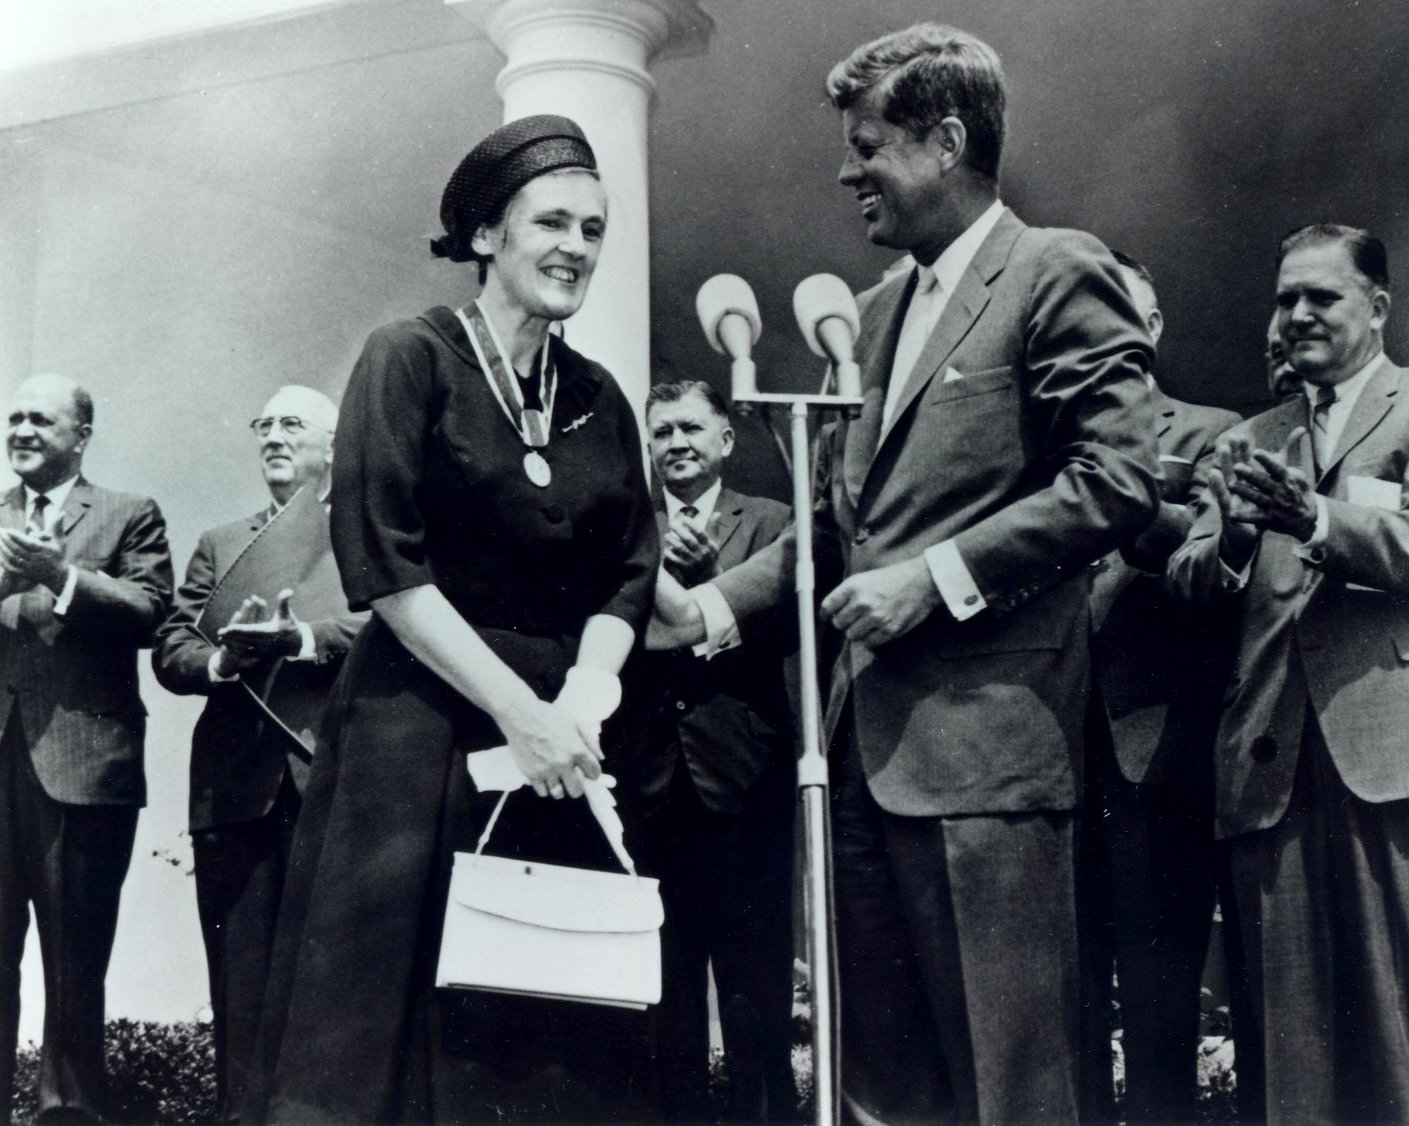 honored by President John F. Kennedy in 1962. Photo: Courtesy of FDA